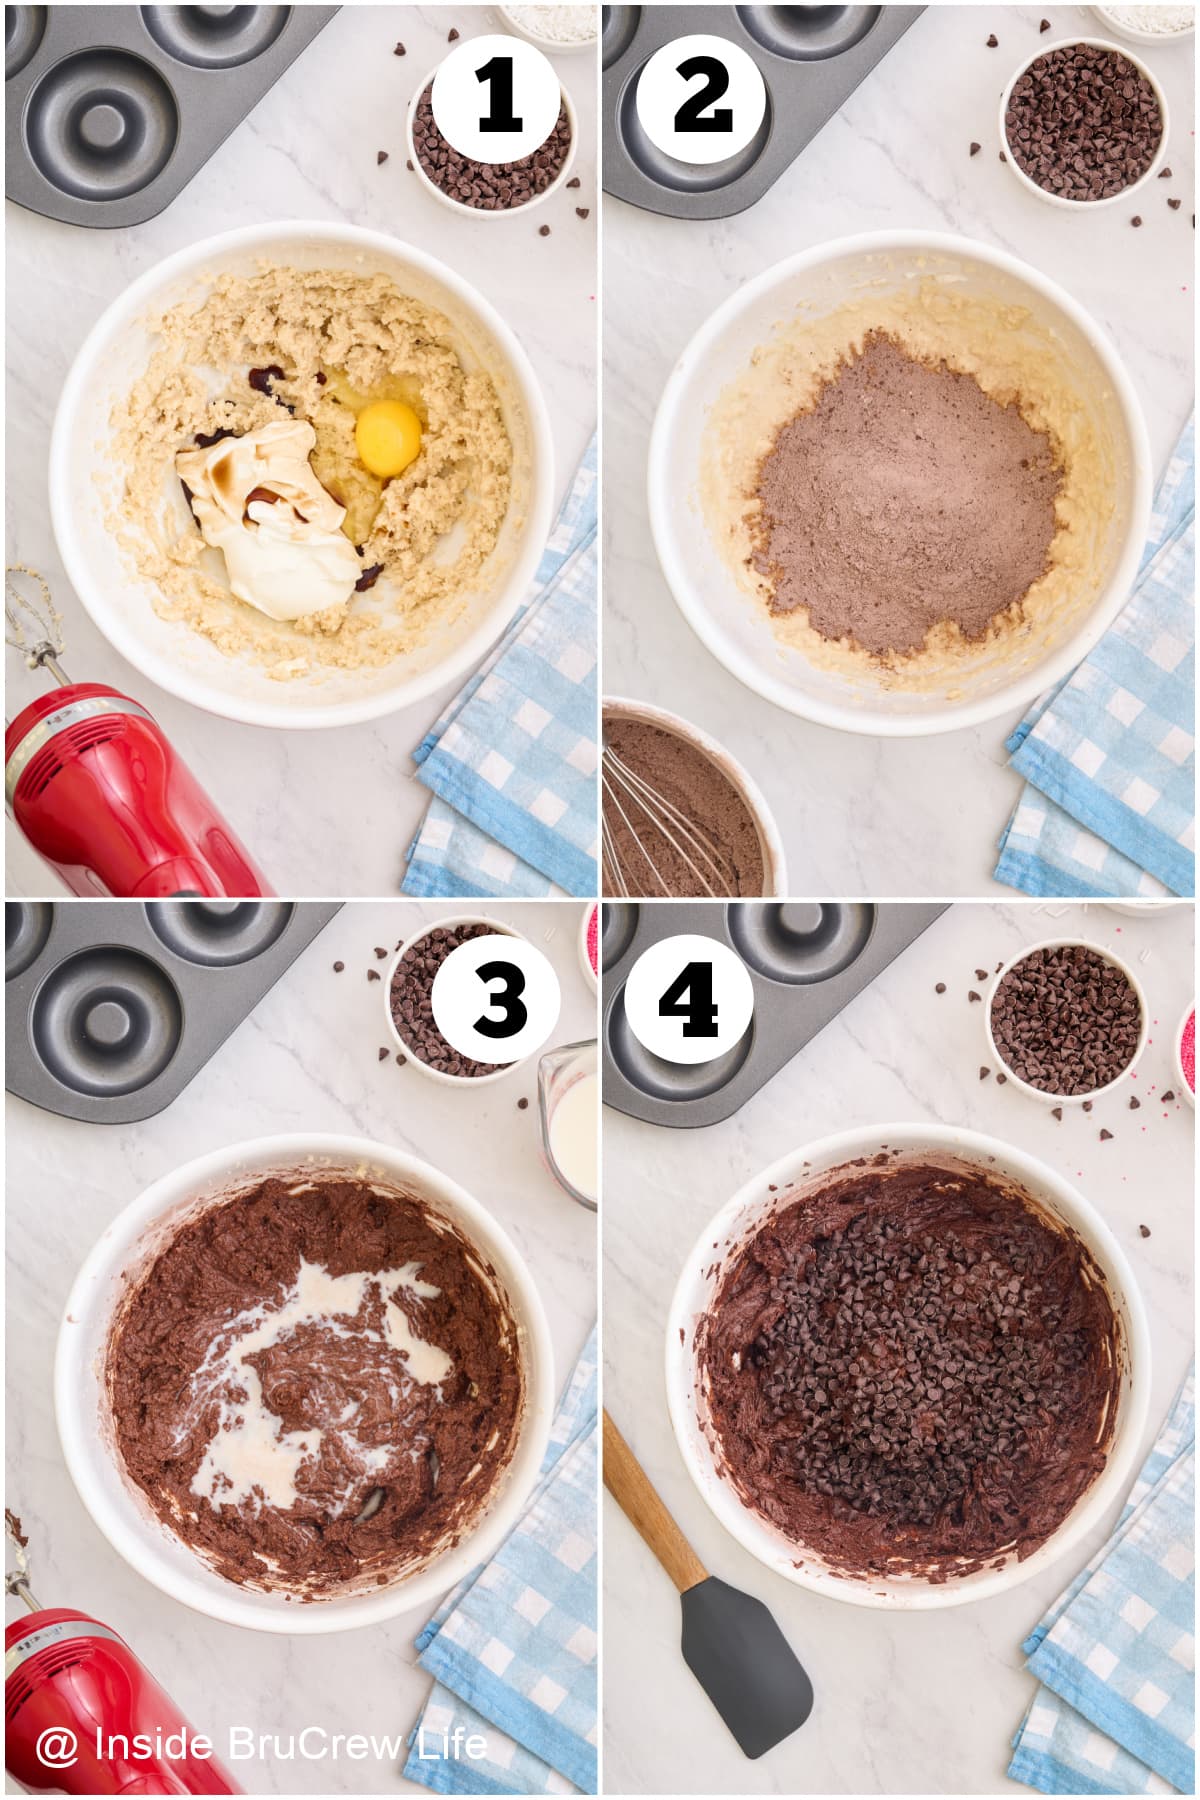 Four pictures collaged together showing how to make chocolate donut batter.